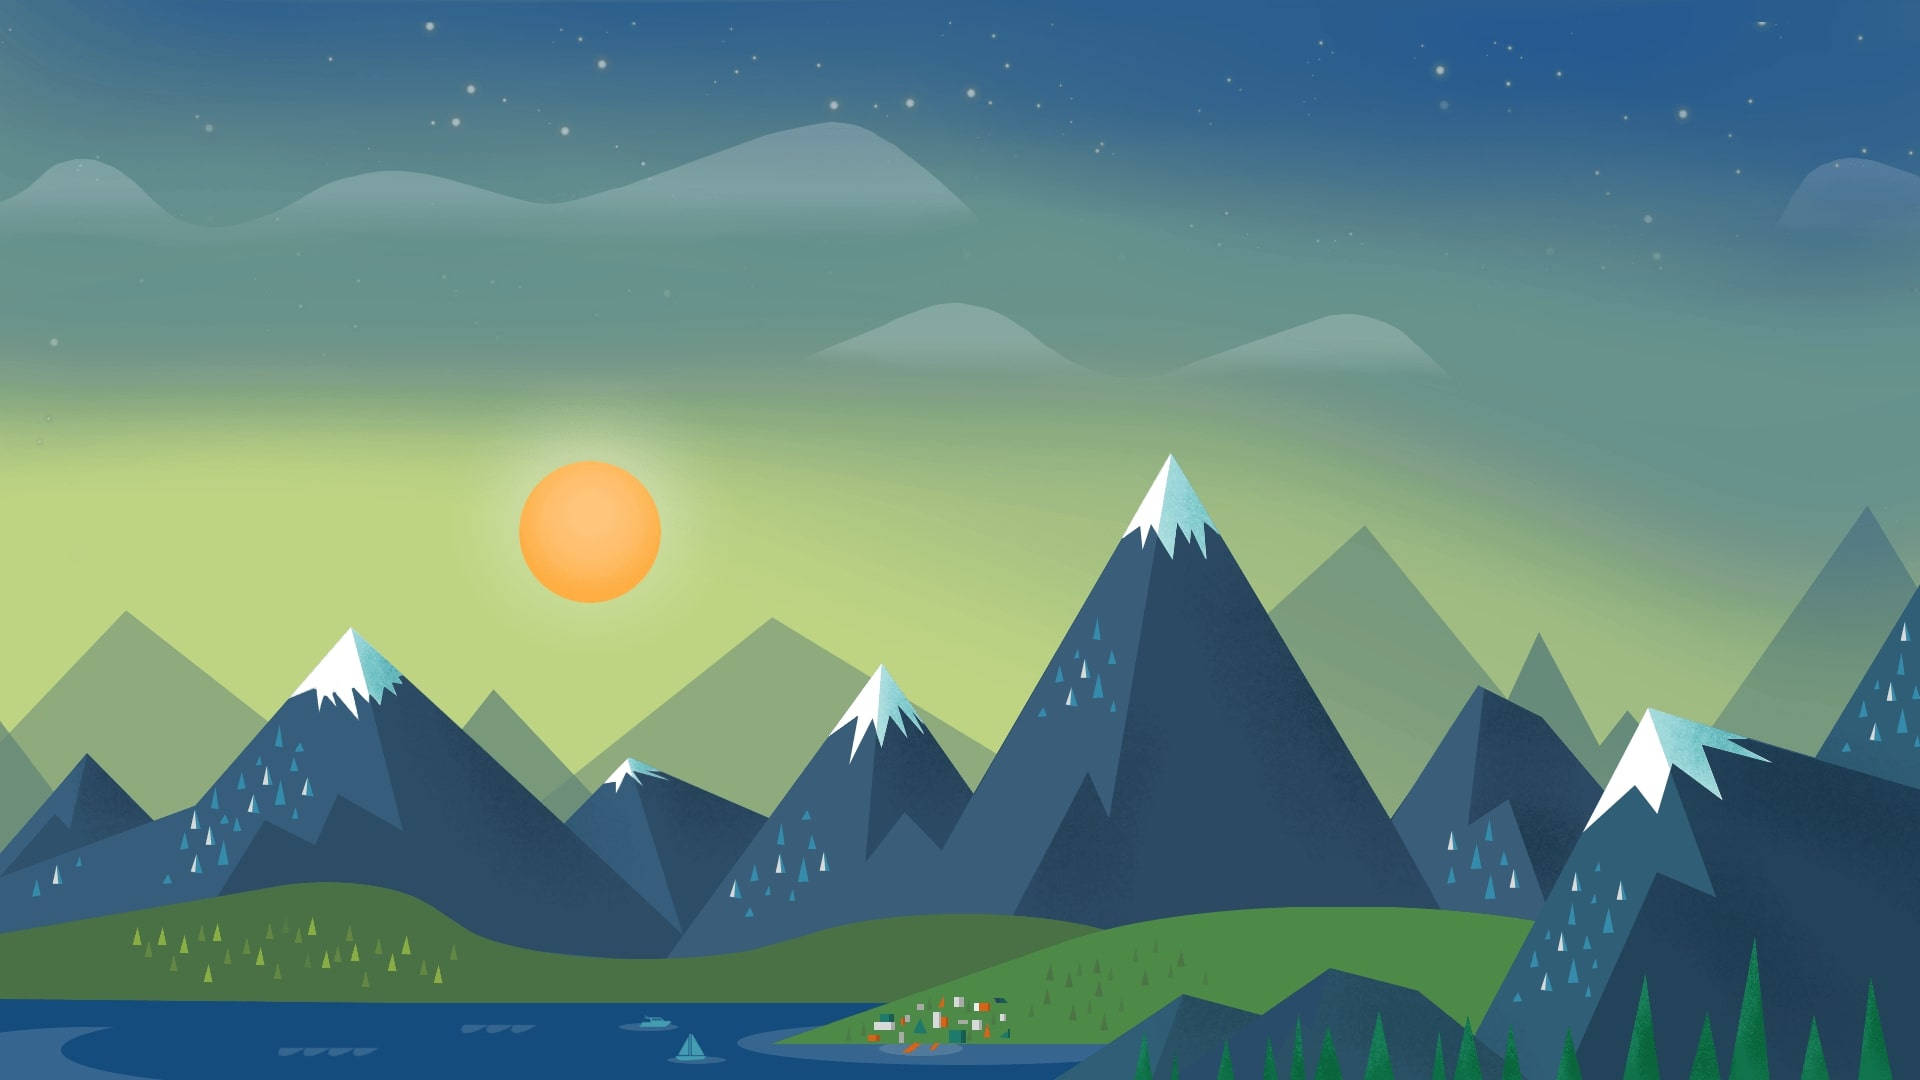 Sunrise And Mountains Material Design Background